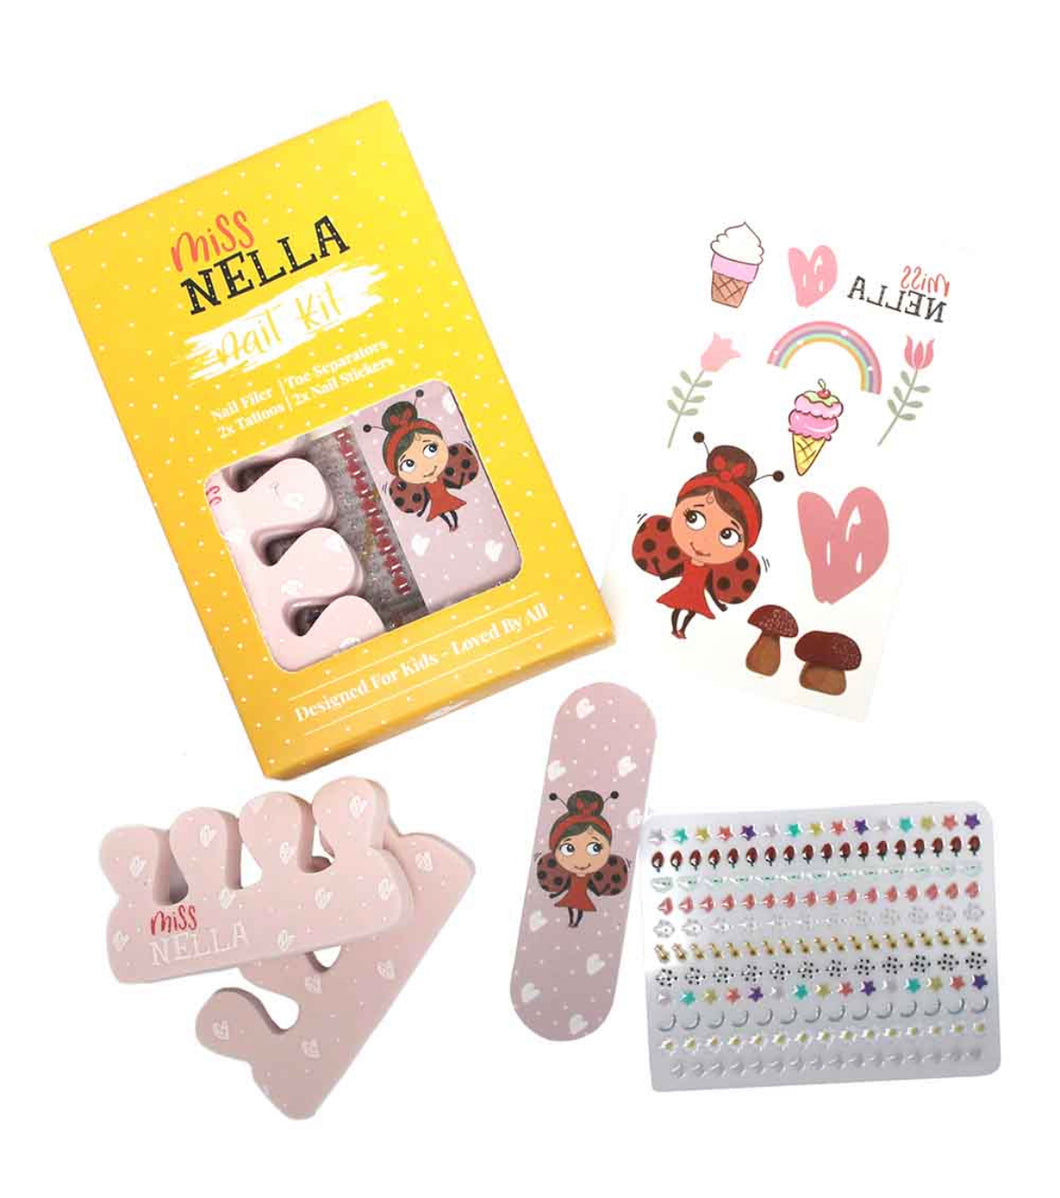 NAILS AND ACCESSORIES SET